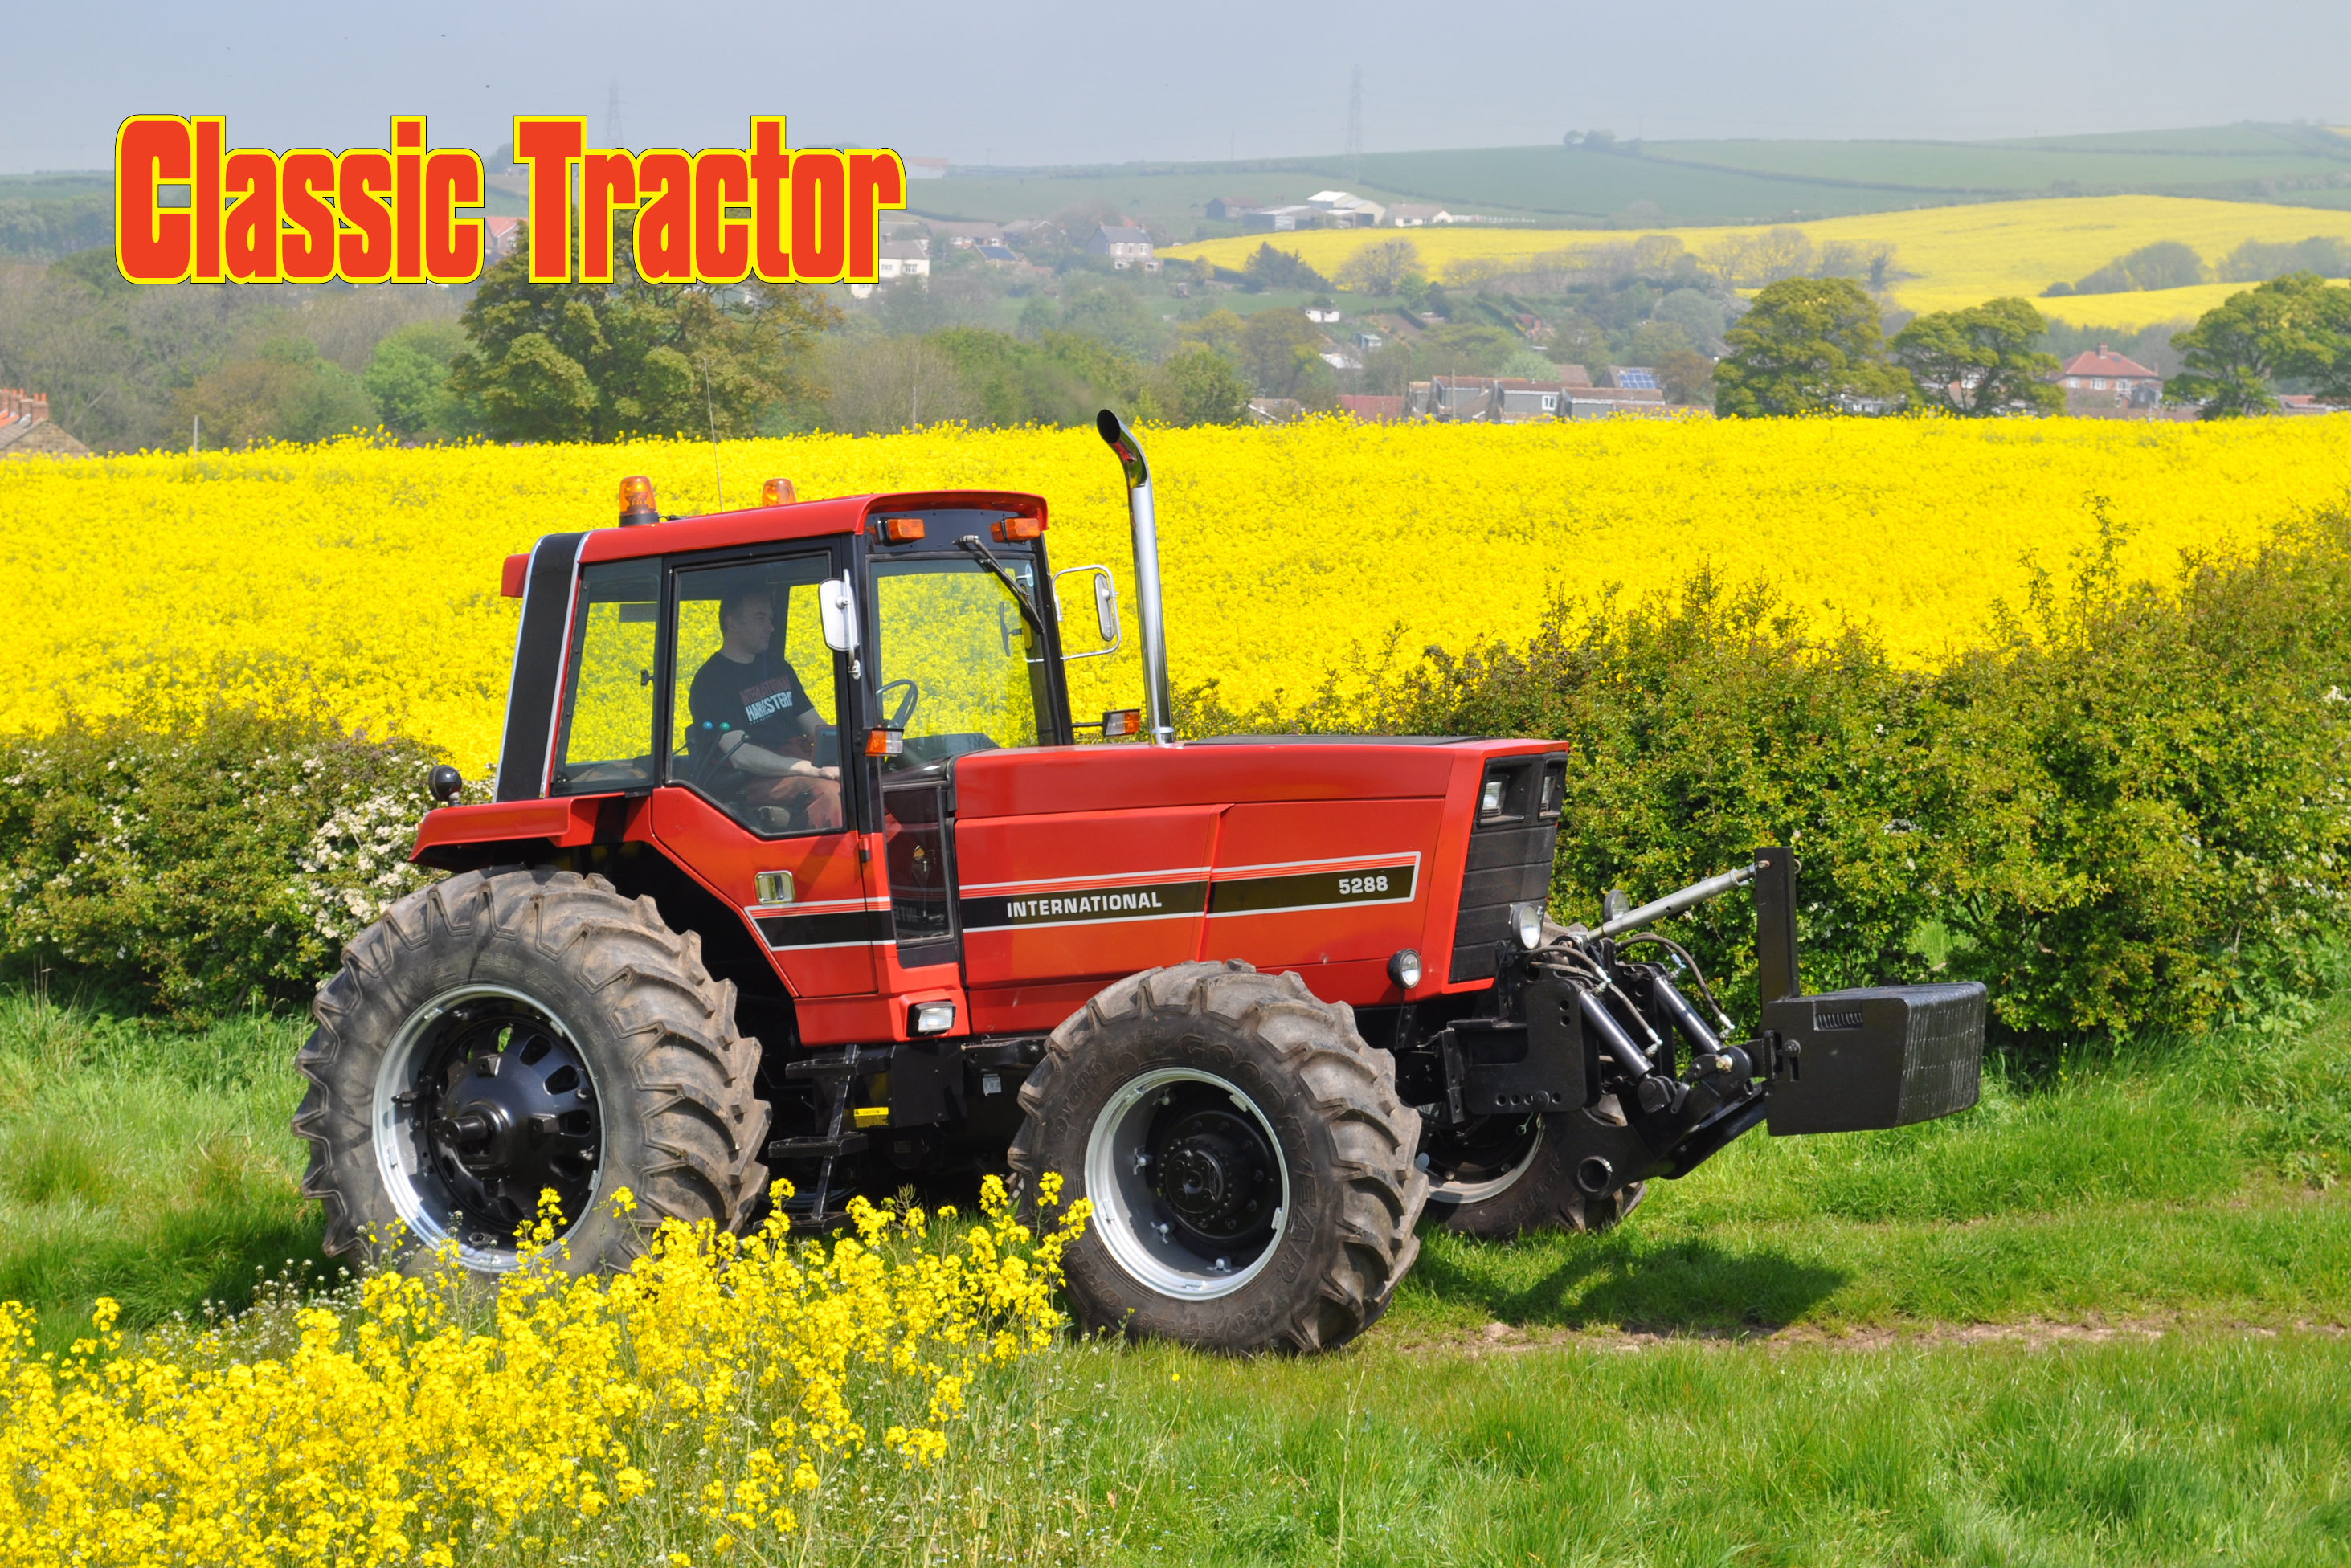 1 International Tractor HD Wallpapers | Backgrounds - Wallpaper Abyss